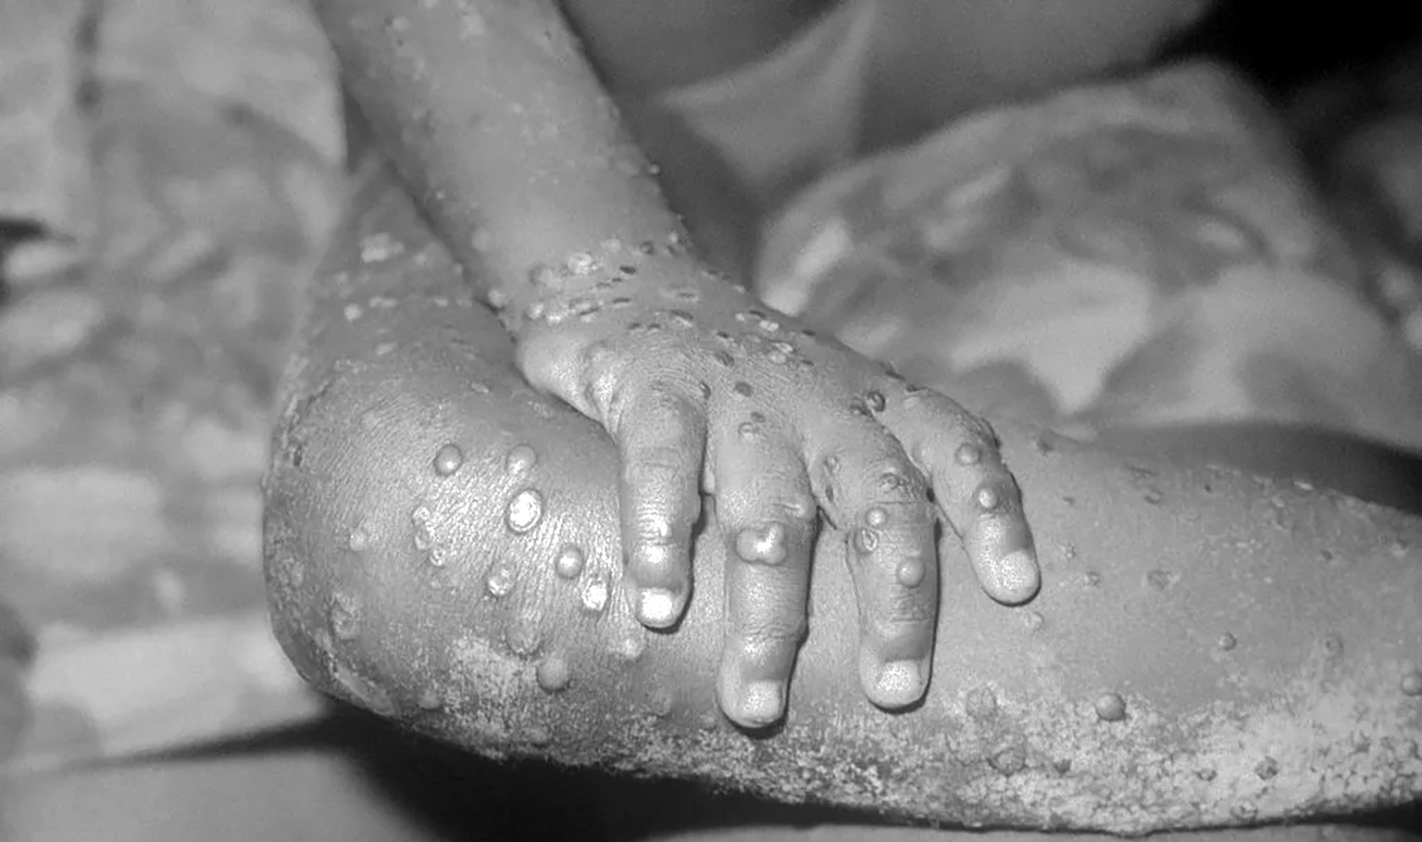 An image showing monkeypox lesions on a patient